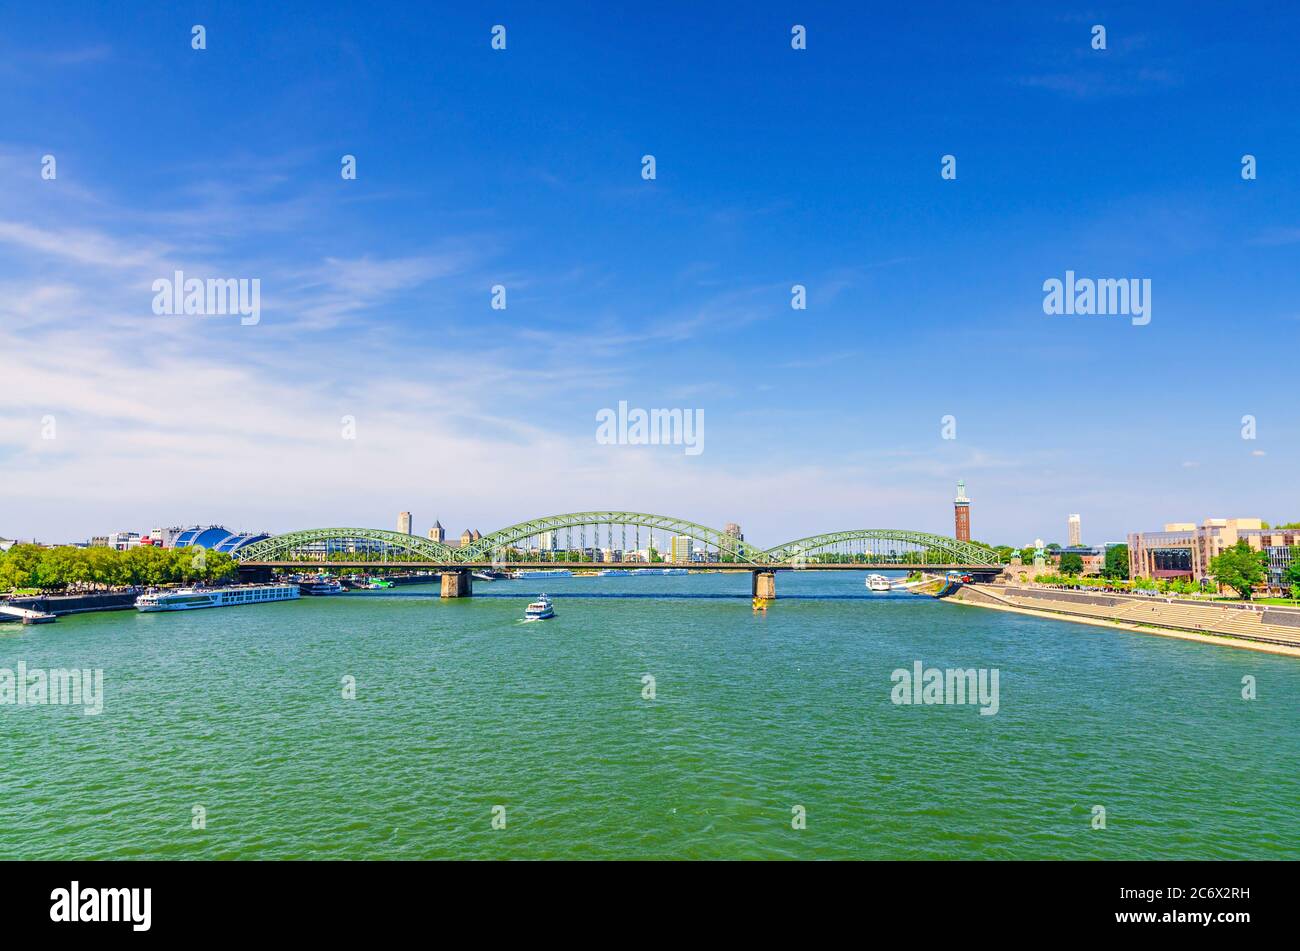 The Hohenzollern Bridge or Hohenzollernbrucke across Rhine river with cargo ships sailing on water, pedestrian and railway steel bridge, Cologne city centre, North Rhine-Westphalia, Germany Stock Photo